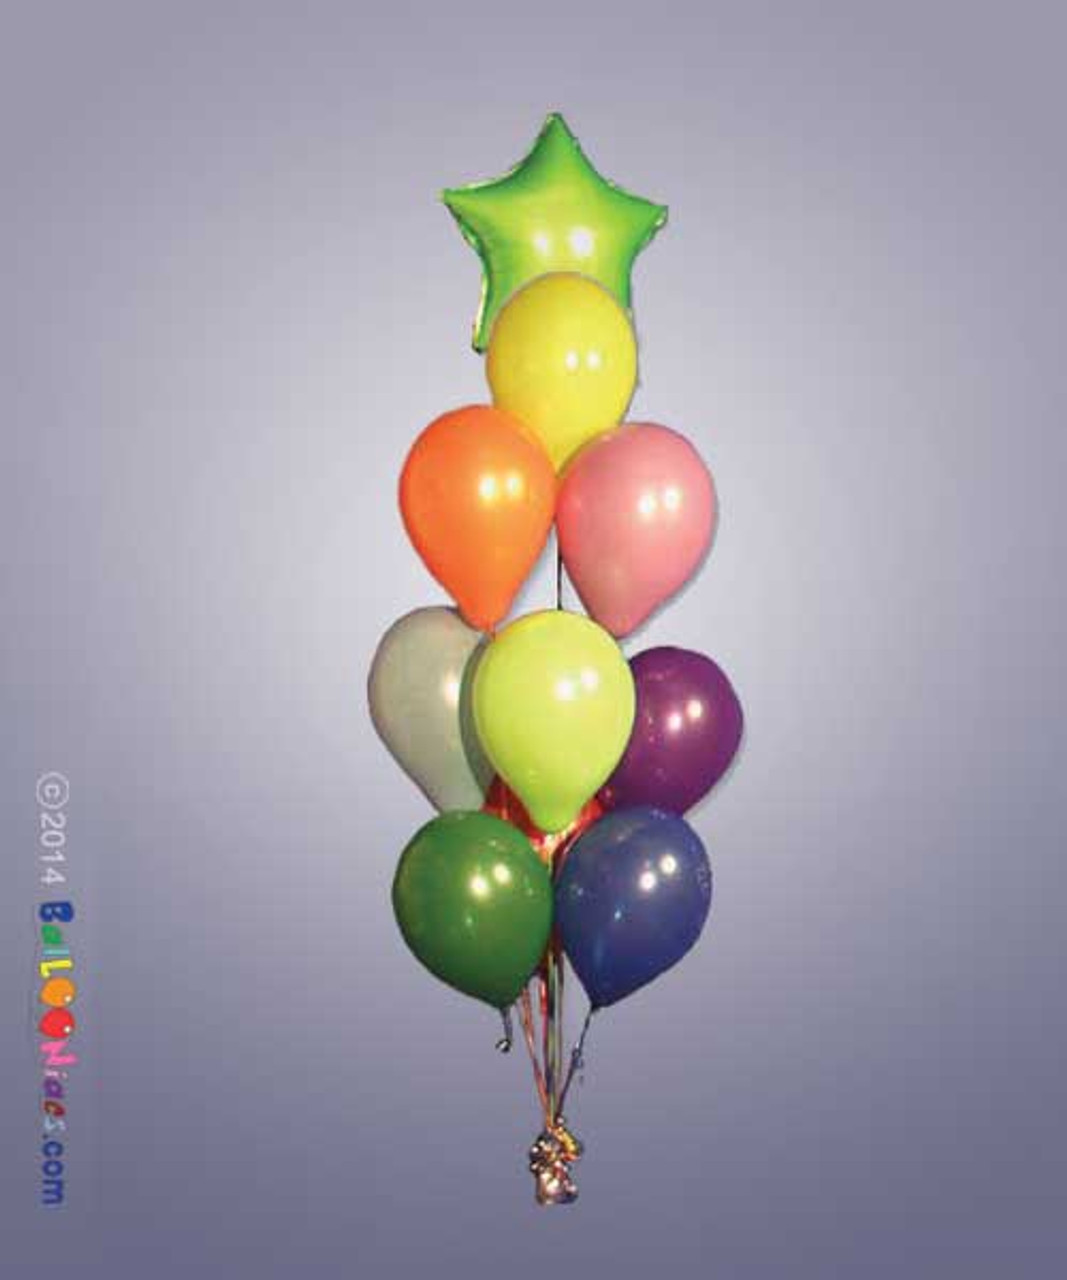 Birthday Balloons - Mylar, Confetti Filled, and Latex